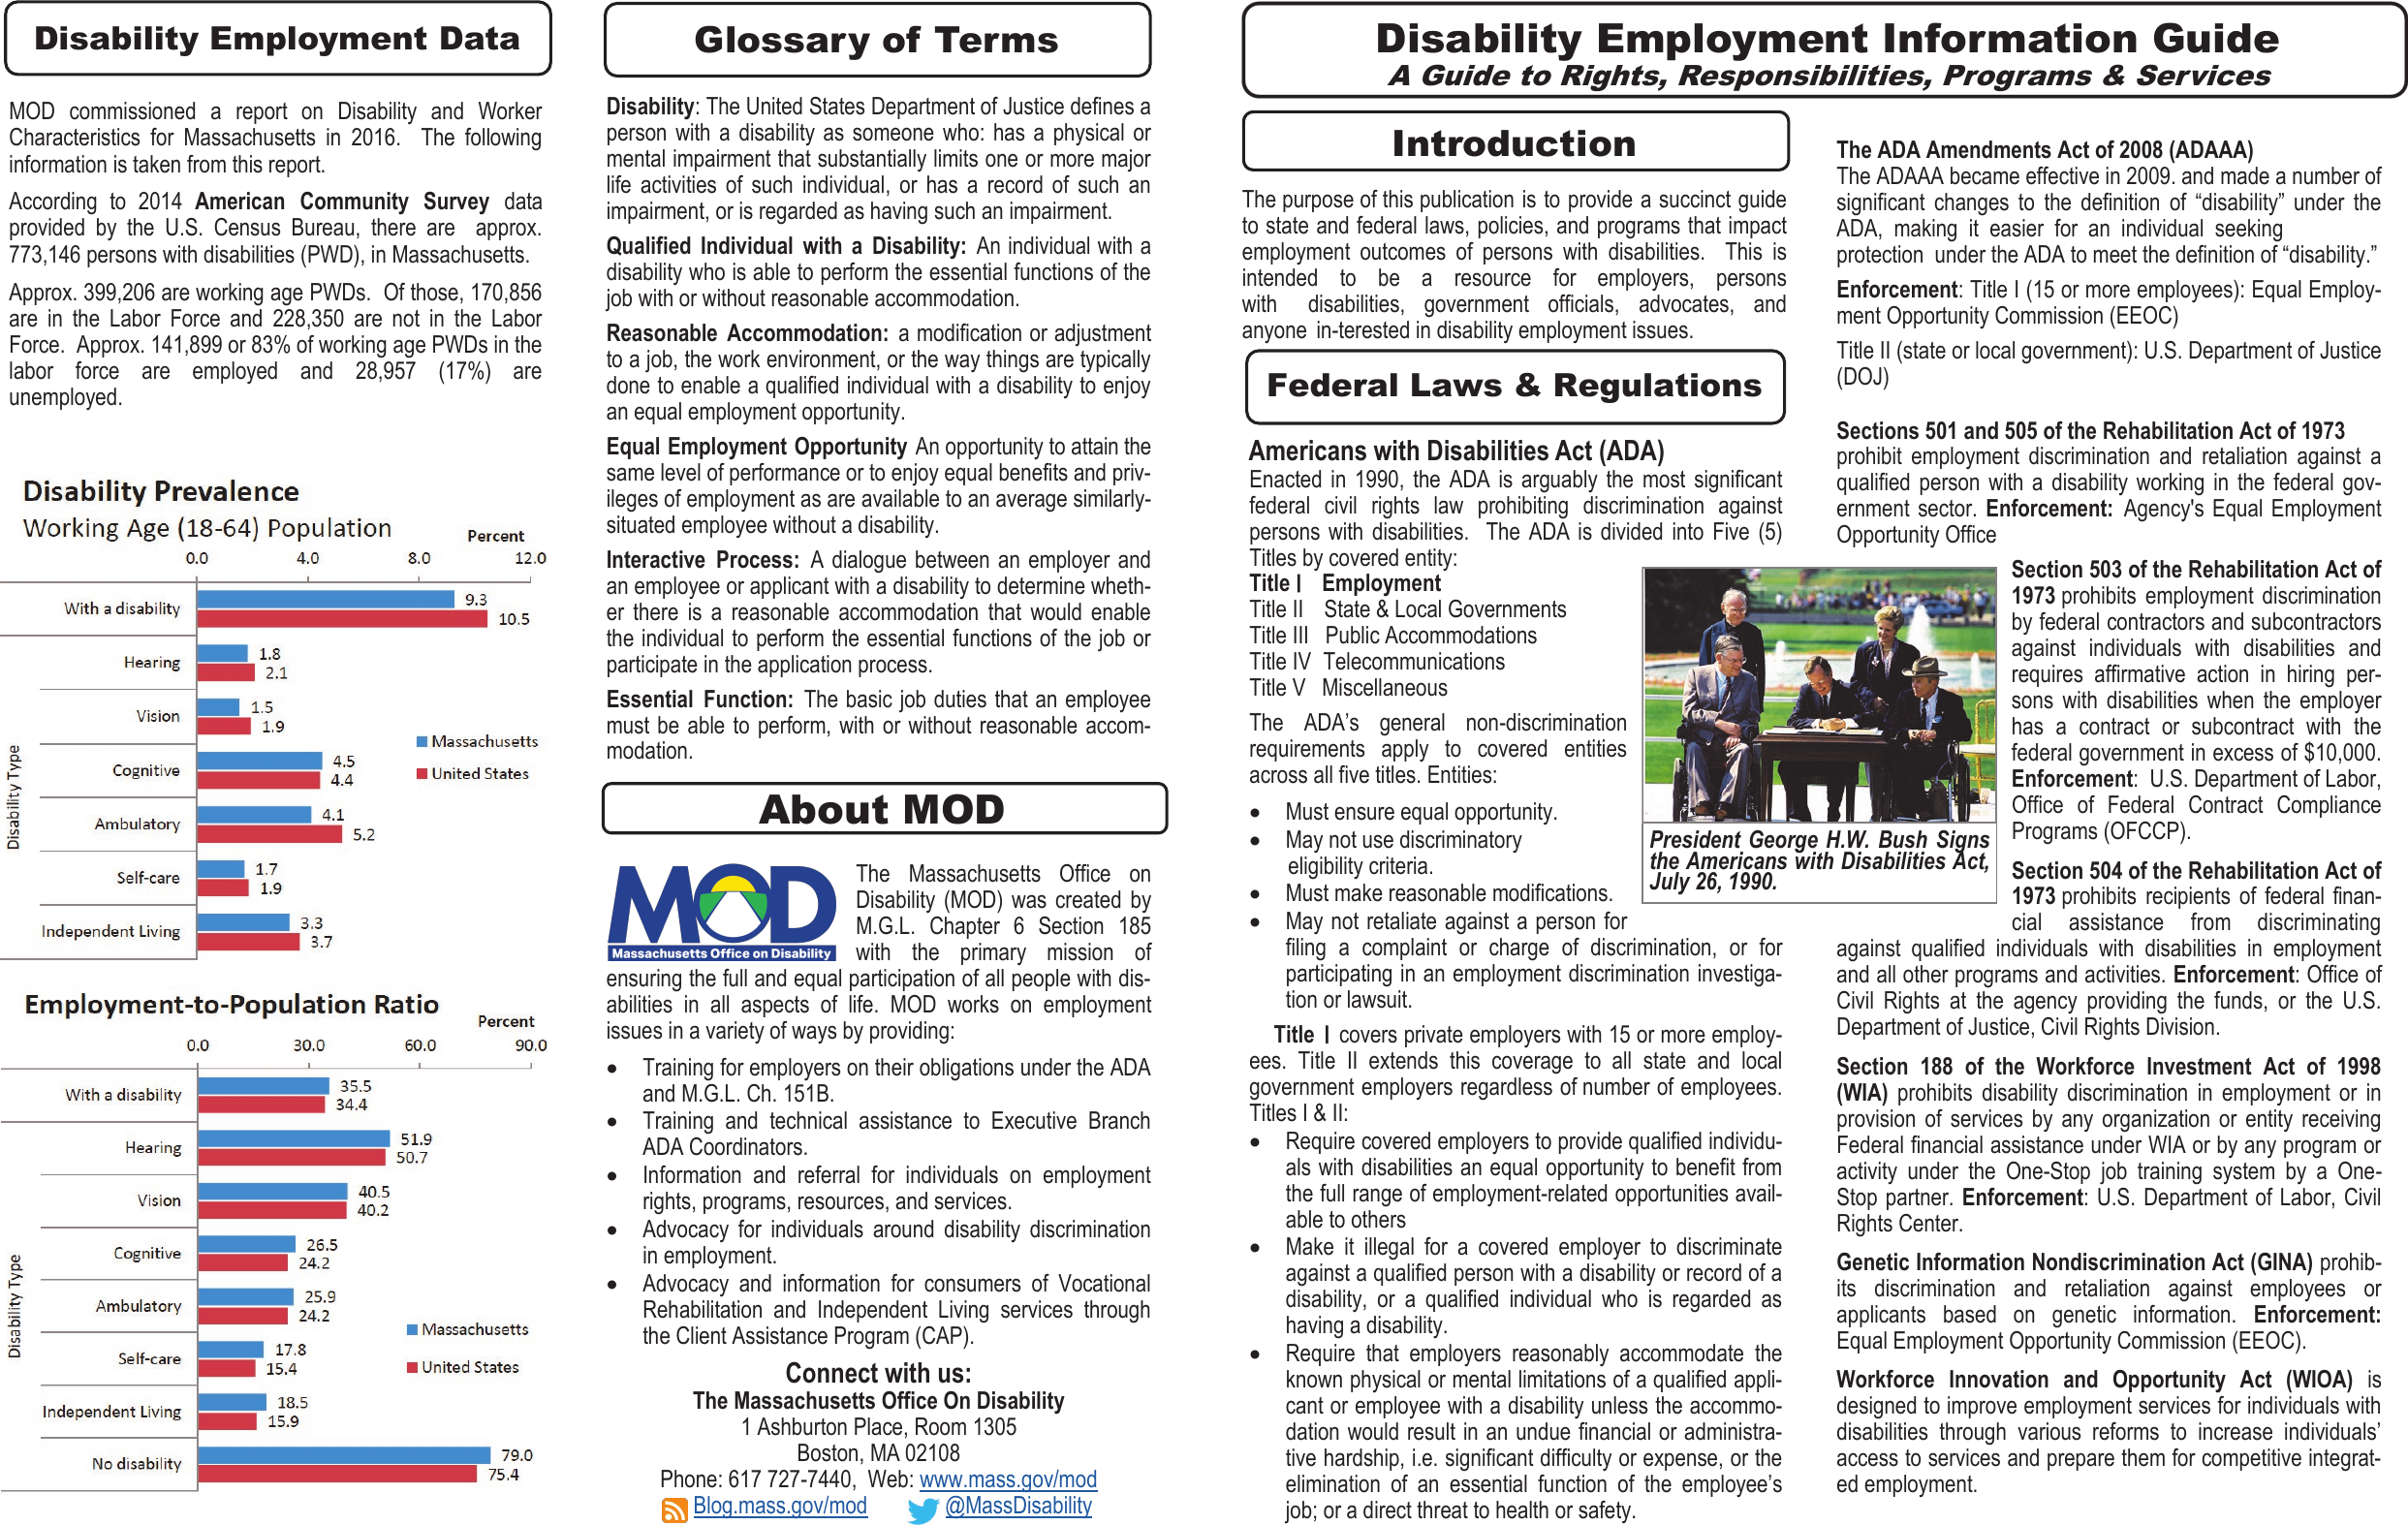 Page 1 of 2 - Disability Employment Information Guide